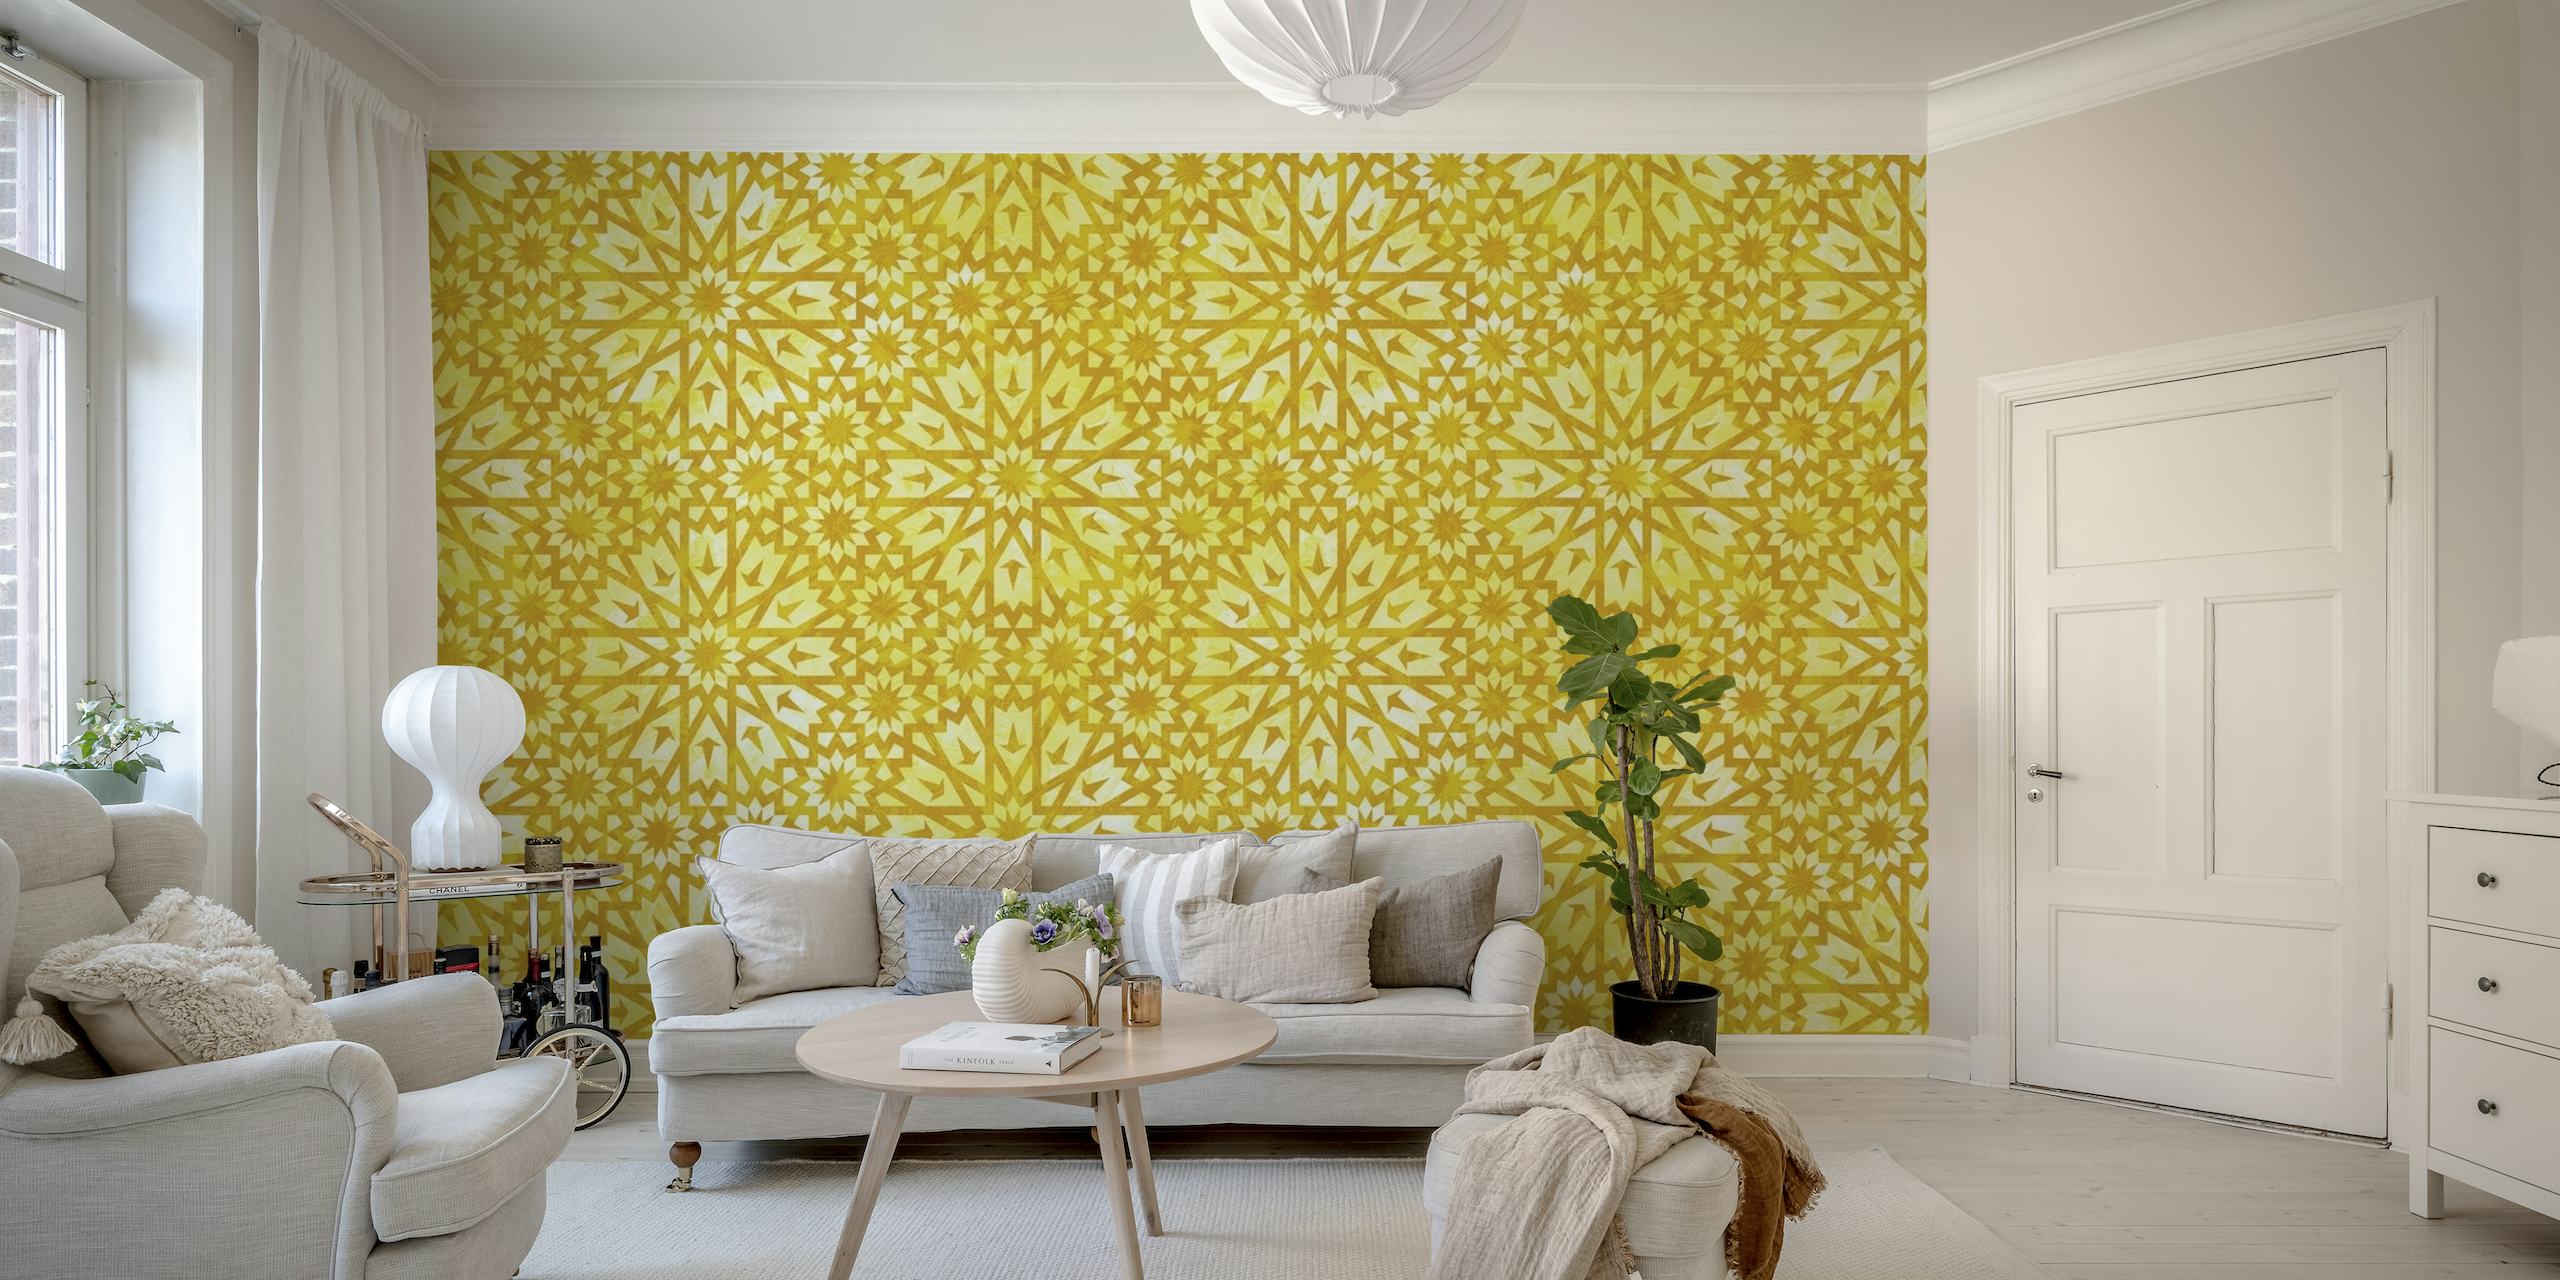 Yellow Moroccan tile pattern wall mural from Happywall